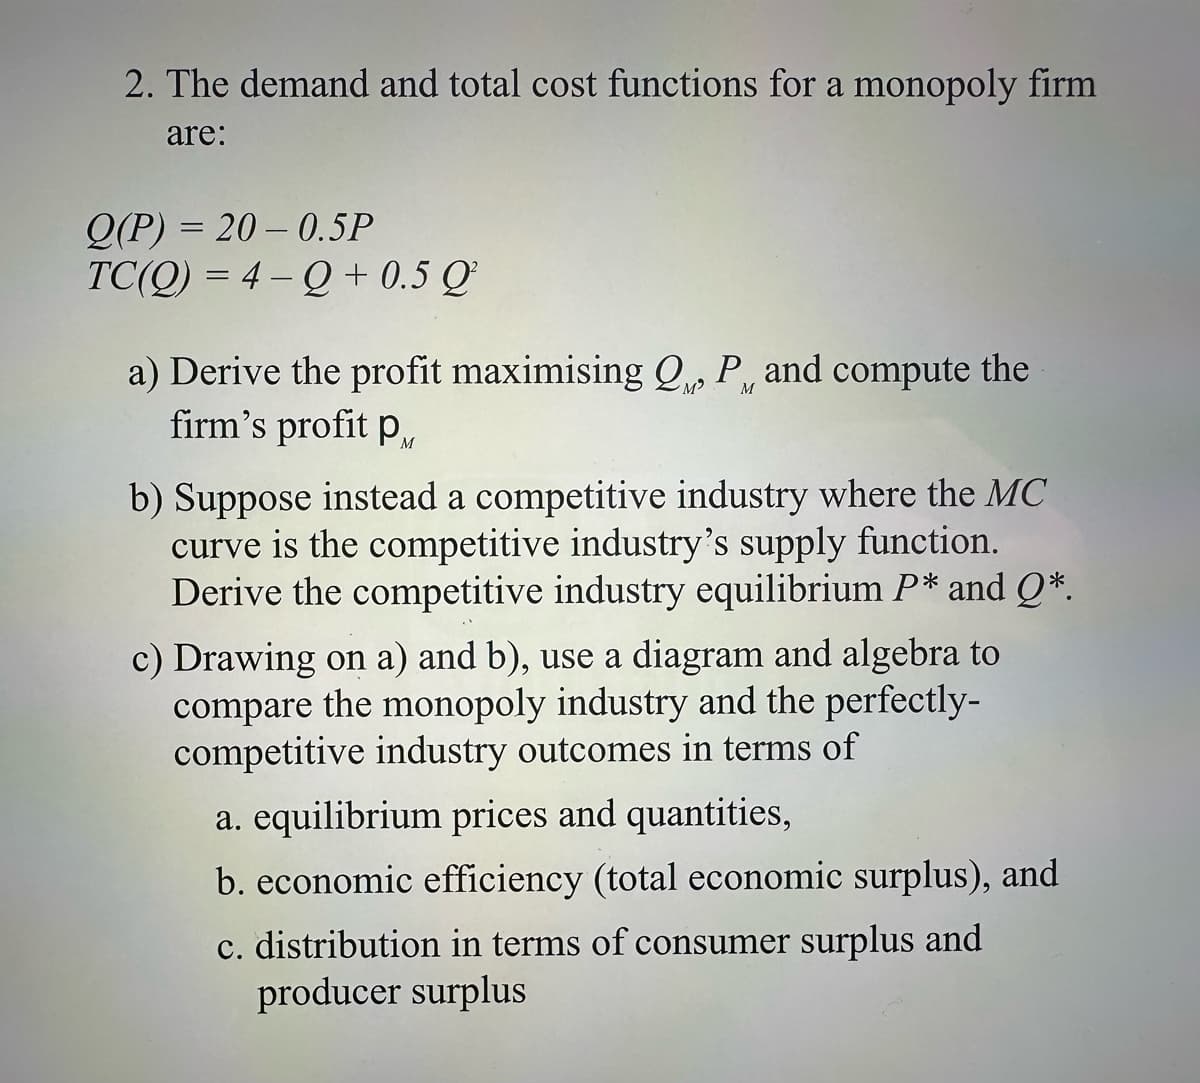 2. The demand and total cost functions for a monopoly firm
are:
Q(P) 20-0.5P
TC(Q)=4-Q+0.5
Q²
a) Derive the profit maximising Q₁, P, and compute the
firm's profit p
'M'
M
b) Suppose instead a competitive industry where the MC
curve is the competitive industry's supply function.
Derive the competitive industry equilibrium P* and Q*.
c) Drawing on a) and b), use a diagram and algebra to
compare the monopoly industry and the perfectly-
competitive industry outcomes in terms of
a. equilibrium prices and quantities,
b. economic efficiency (total economic surplus), and
c. distribution in terms of consumer surplus and
producer surplus